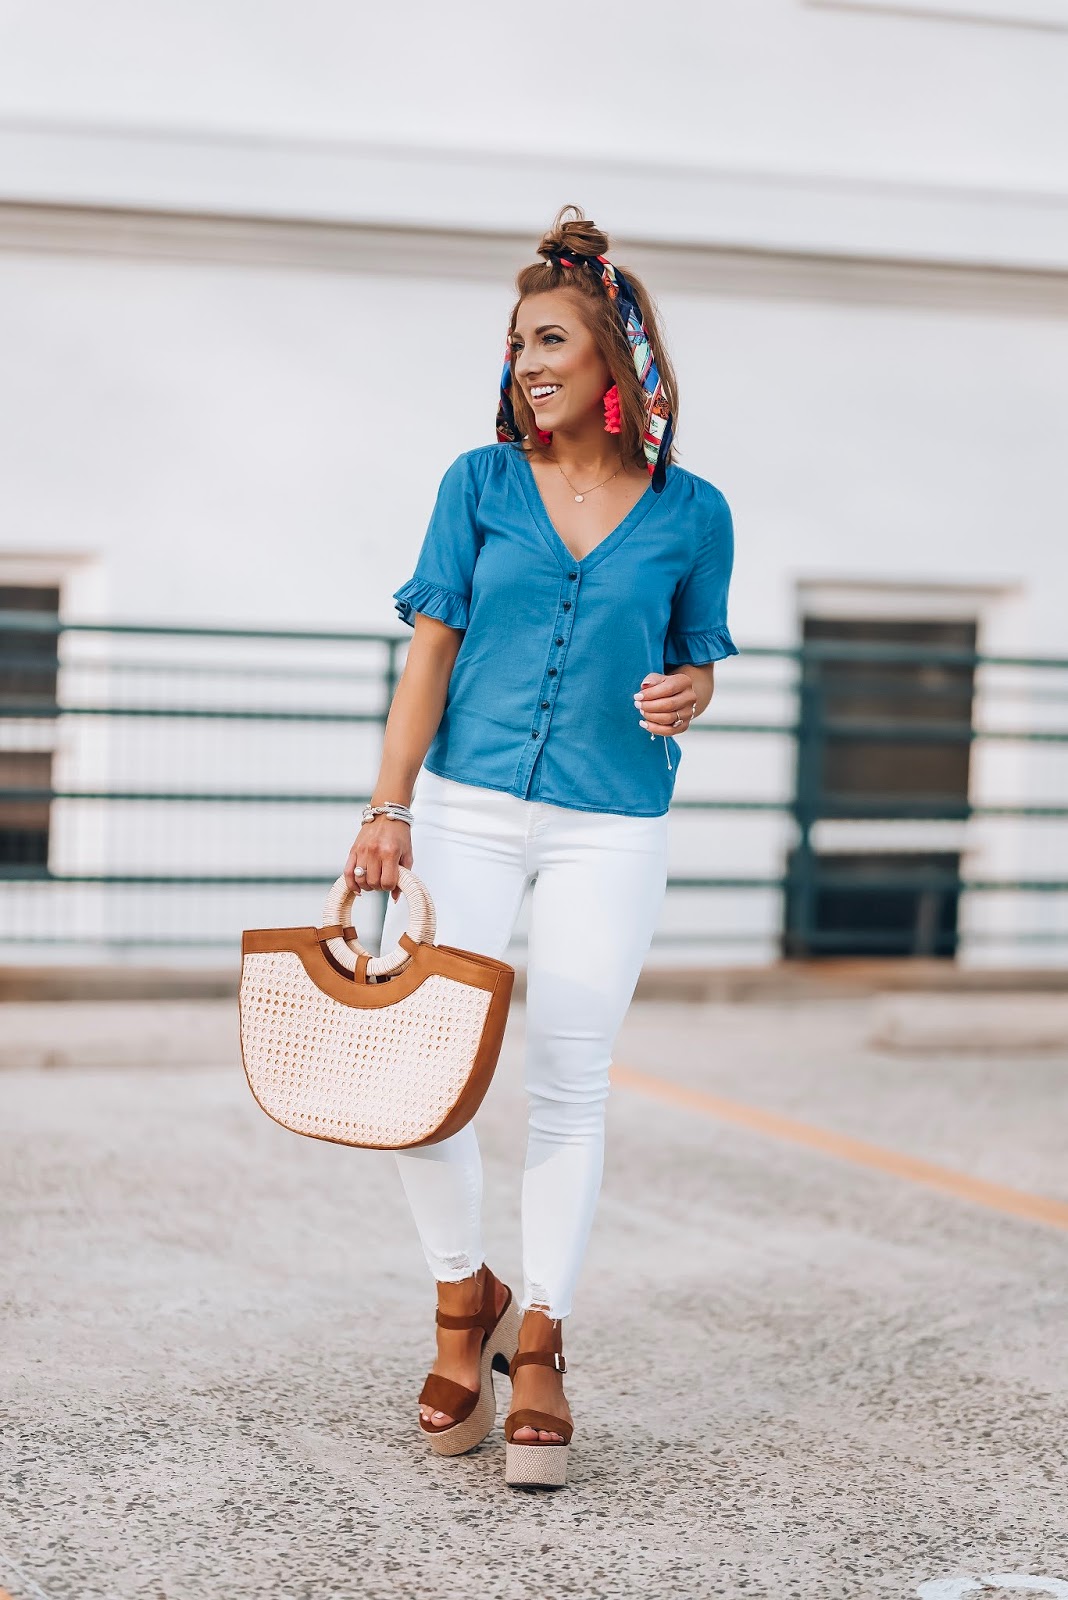 My Favorite Way to Style Chambray: Madewell Ruffle Sleeve Chambray Top, Target Straw Bag + $12 Scarf - Something Delightful Blog #springstyle #chambray #everydaystyle